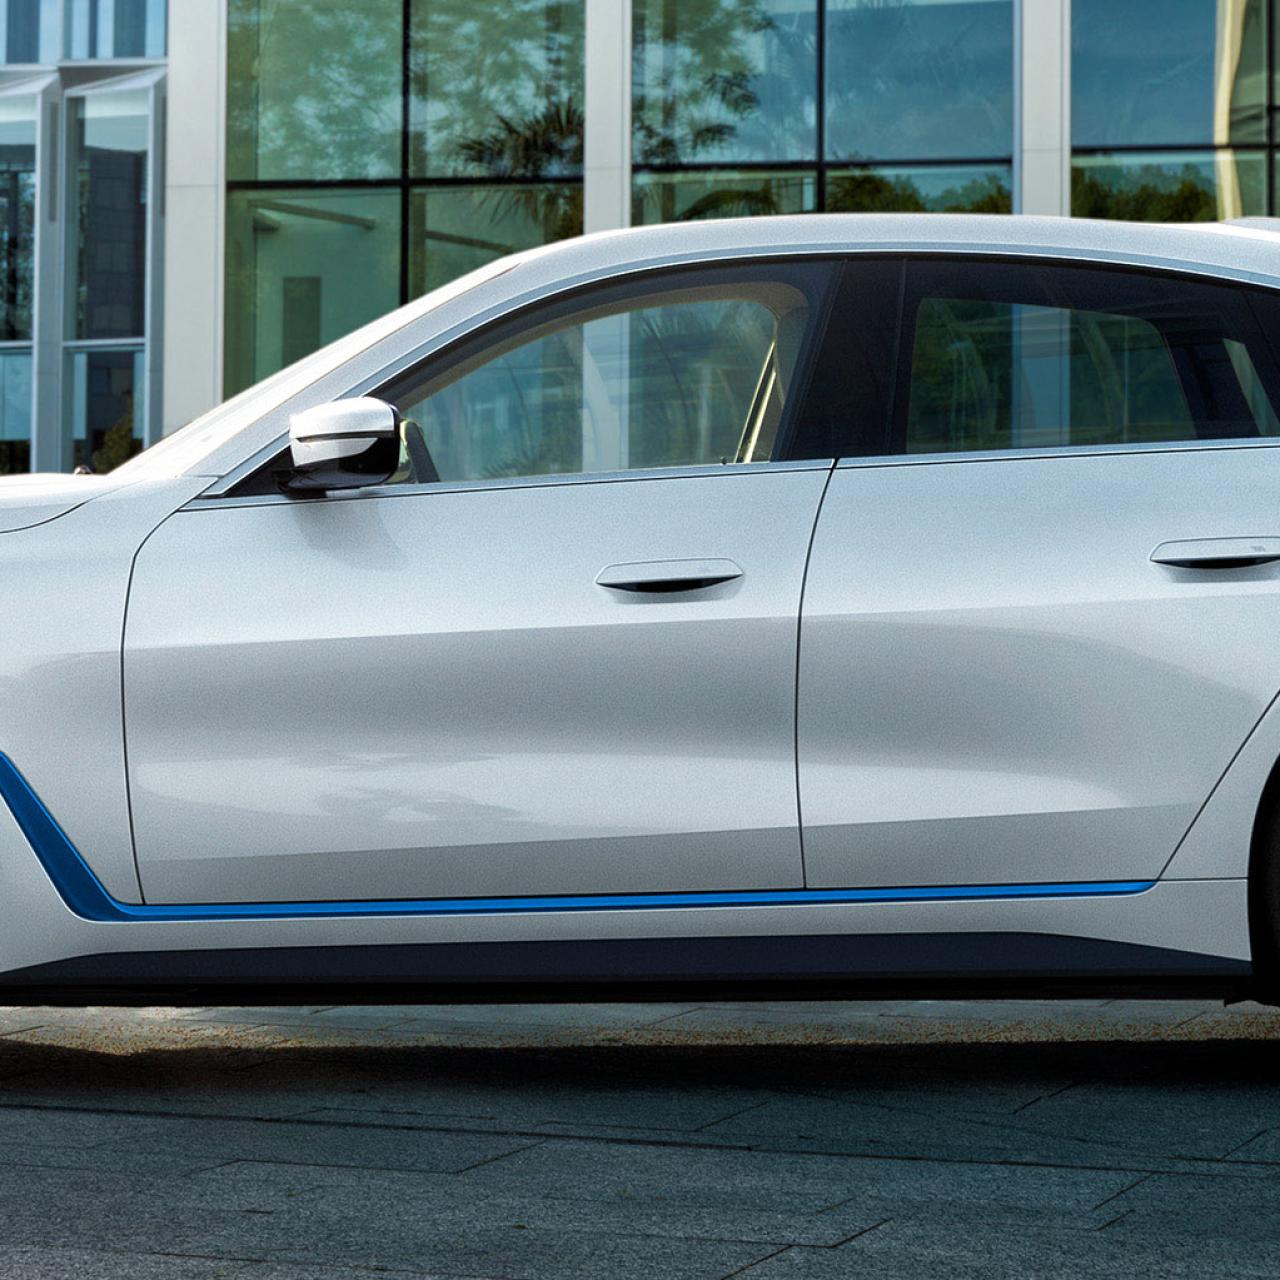 The exciting BMW i4 is here